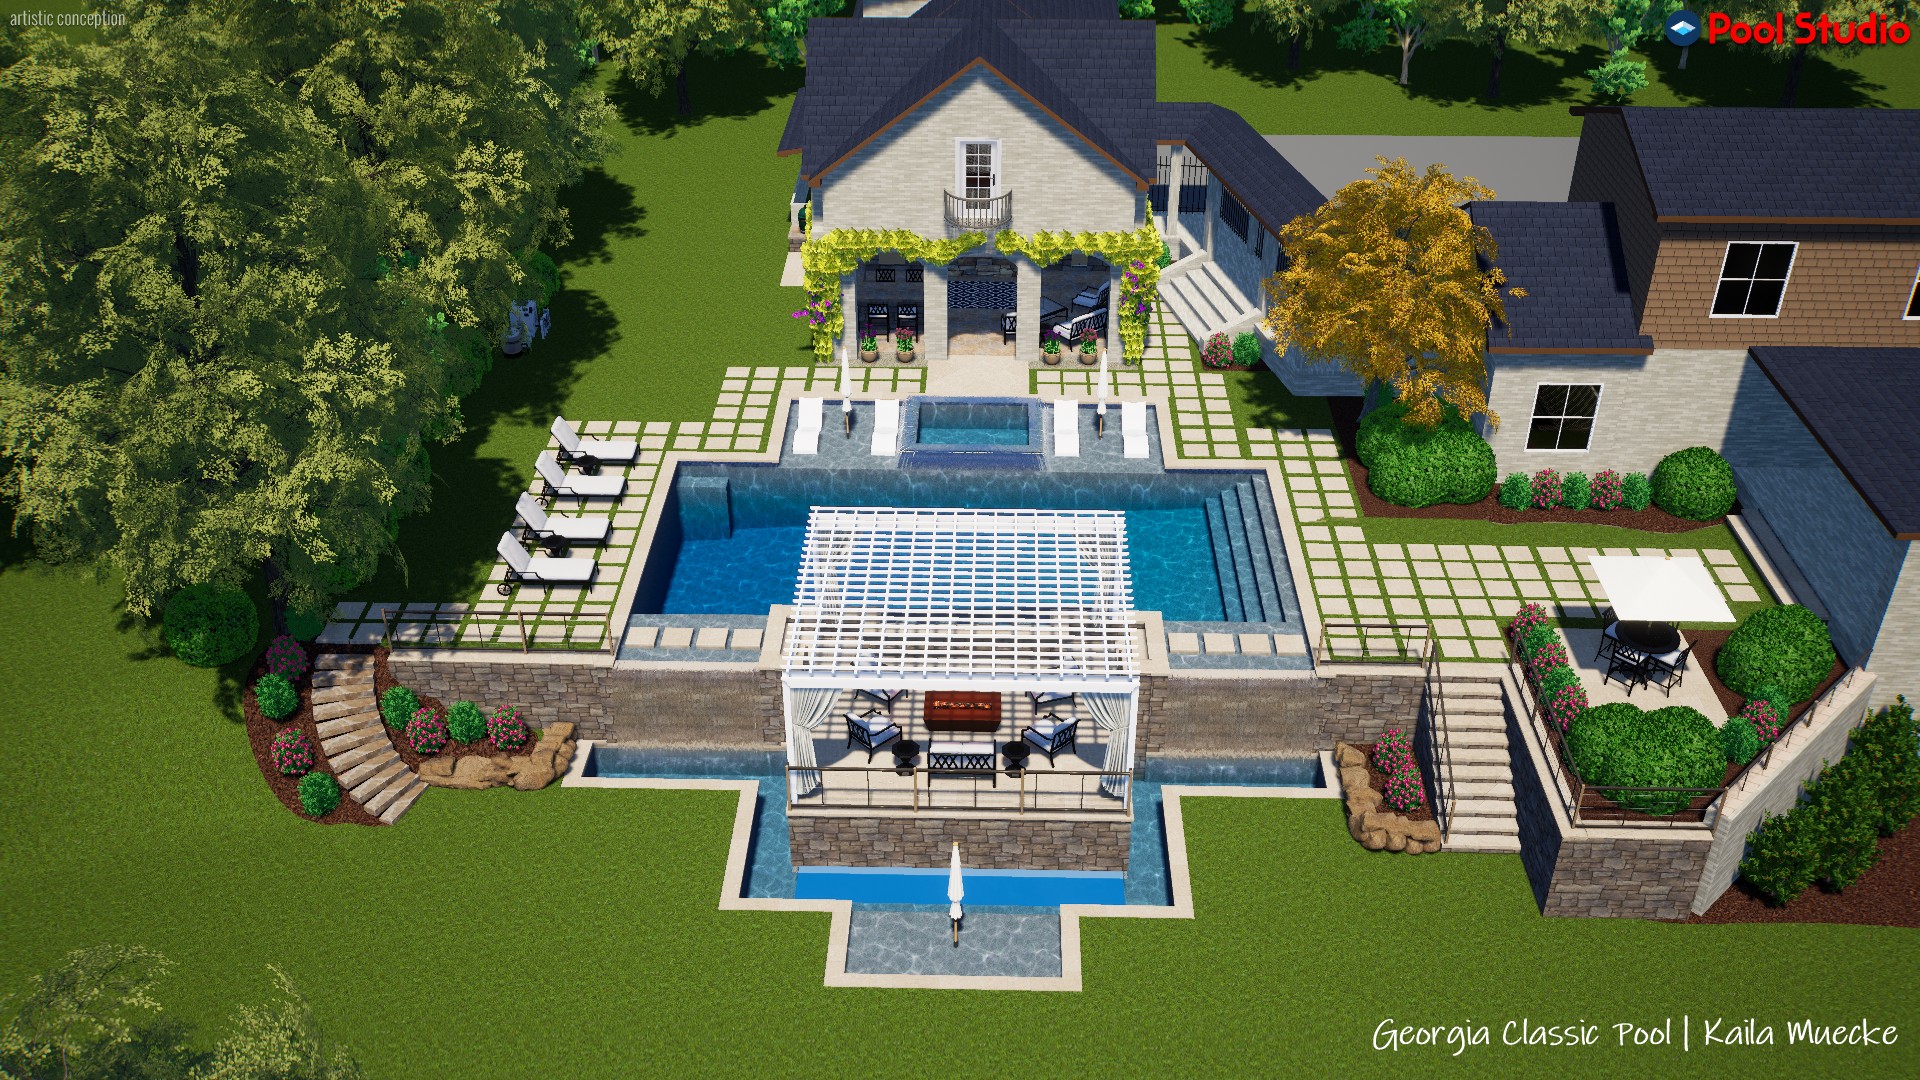 A mesmerizing 3D swimming pool design featuring a vanishing edge, pergola with a full kitchen, and a cabana surrounded by luxurious 2' x 2' travertine decking.